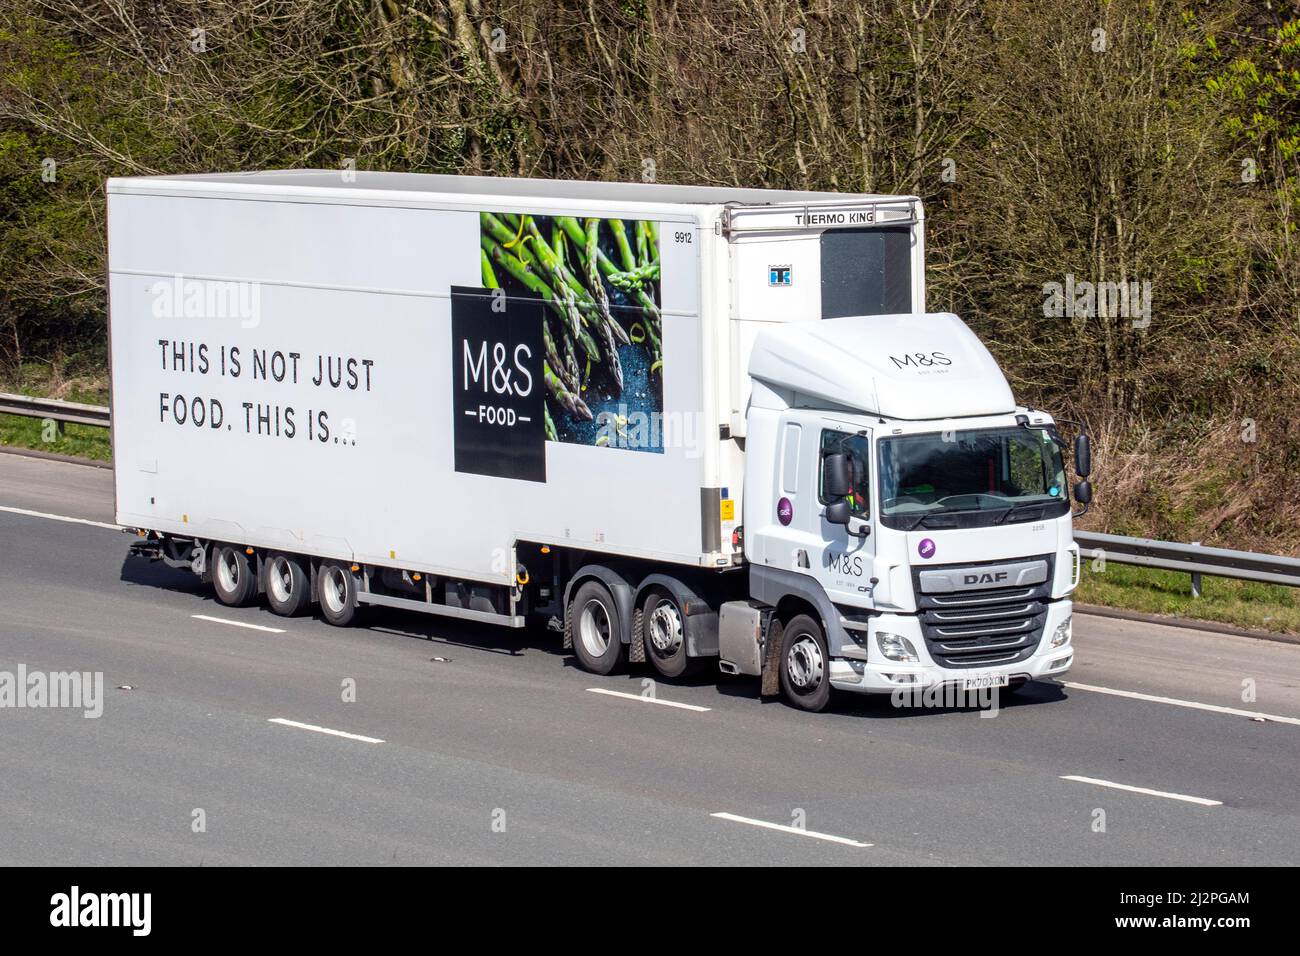 M&S, Marks and Spencer, Marks & Sparks, This is not just food, refrigerated articulated lorry on the M61 Manchester, UK Stock Photo